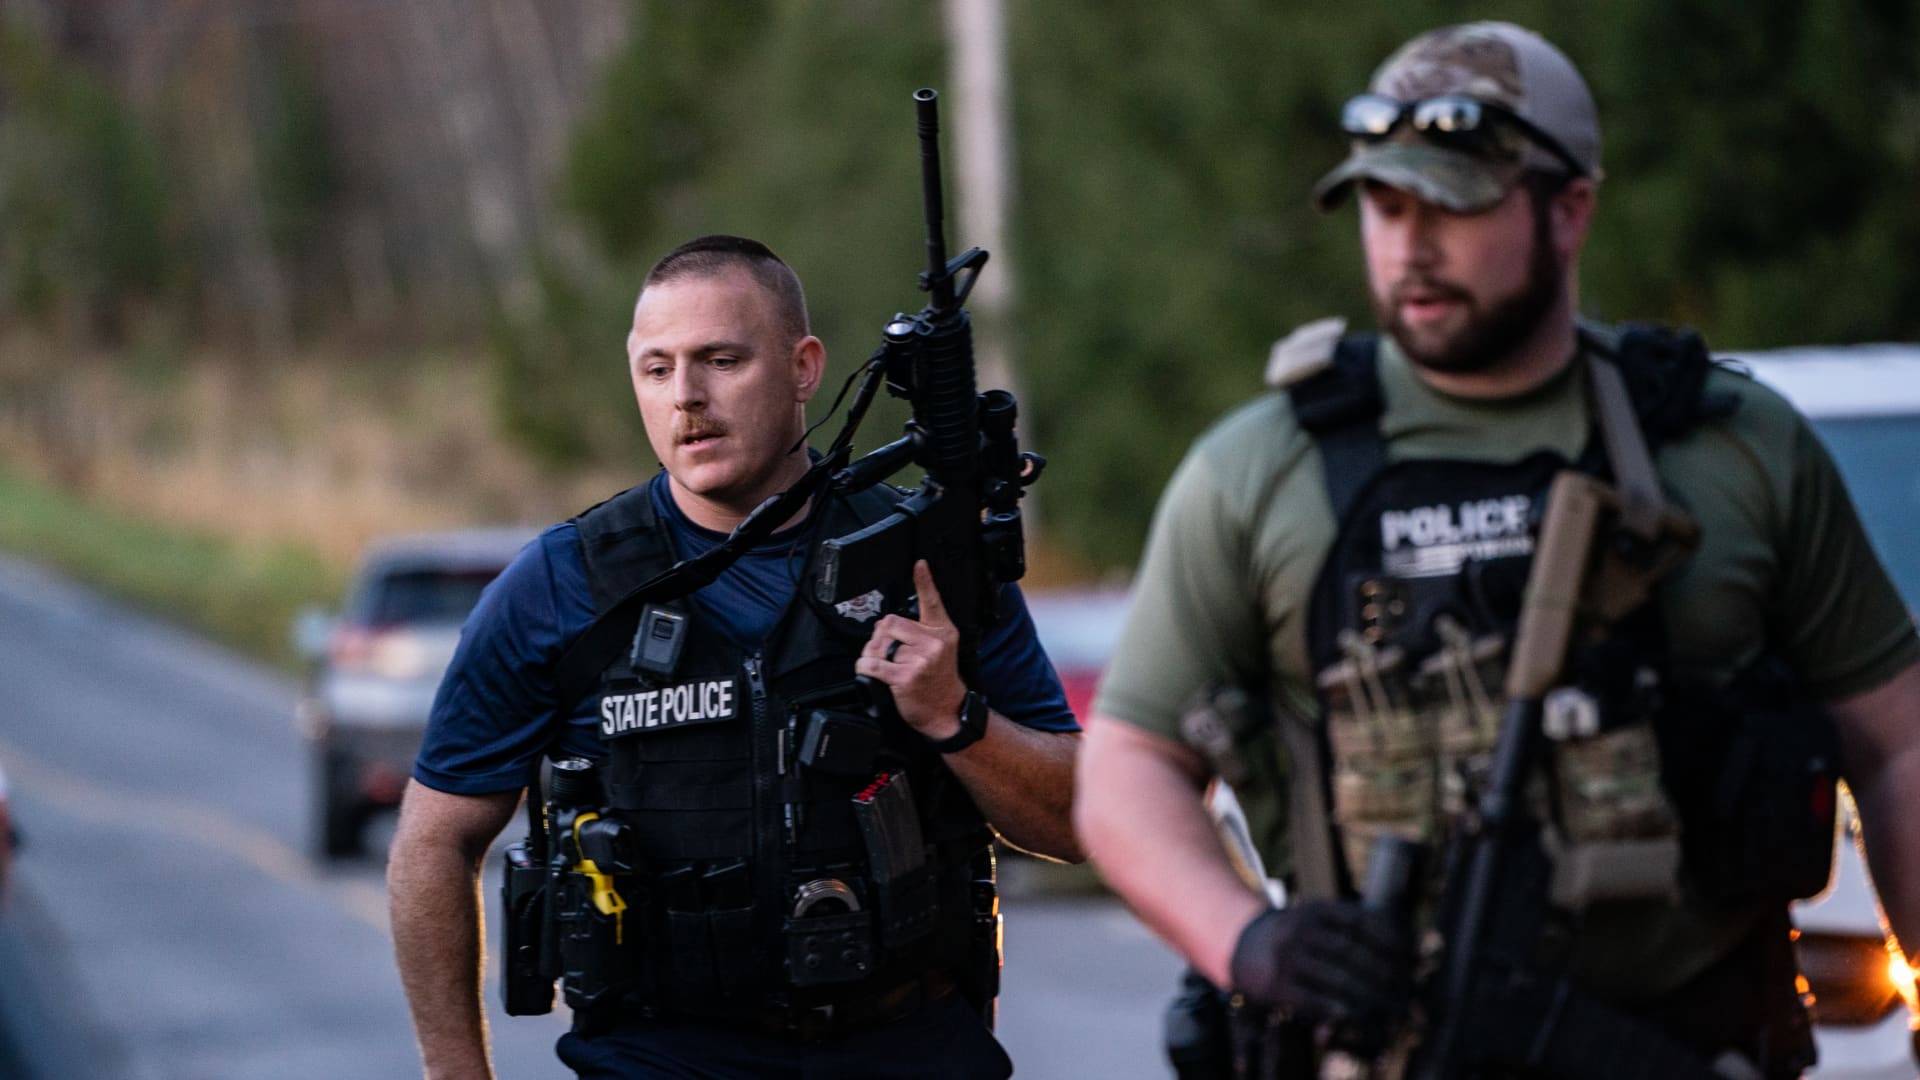 Maine shooting manhunt enters second day; residents still sheltering in place